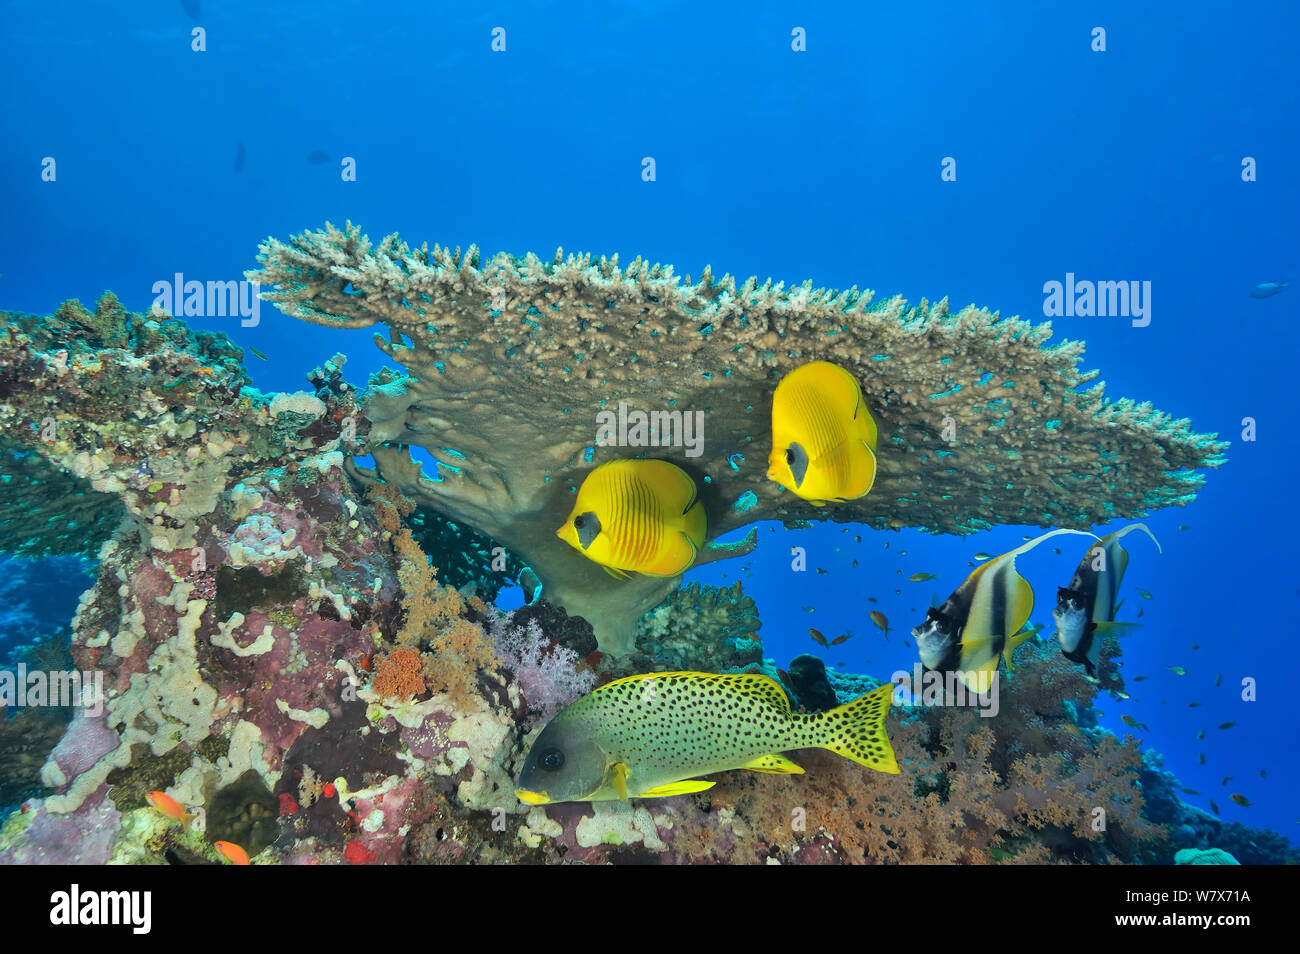 Pair of Masked butterflyfish (Chaetodon semilarvatus), pair of Red Sea bannerfish (Heniochus intermedius) and Backspotted sweetlips (Plectorhinchus gaterinus) under a hard coral table (Acropora) Sudan. Red Sea. Stock Photo